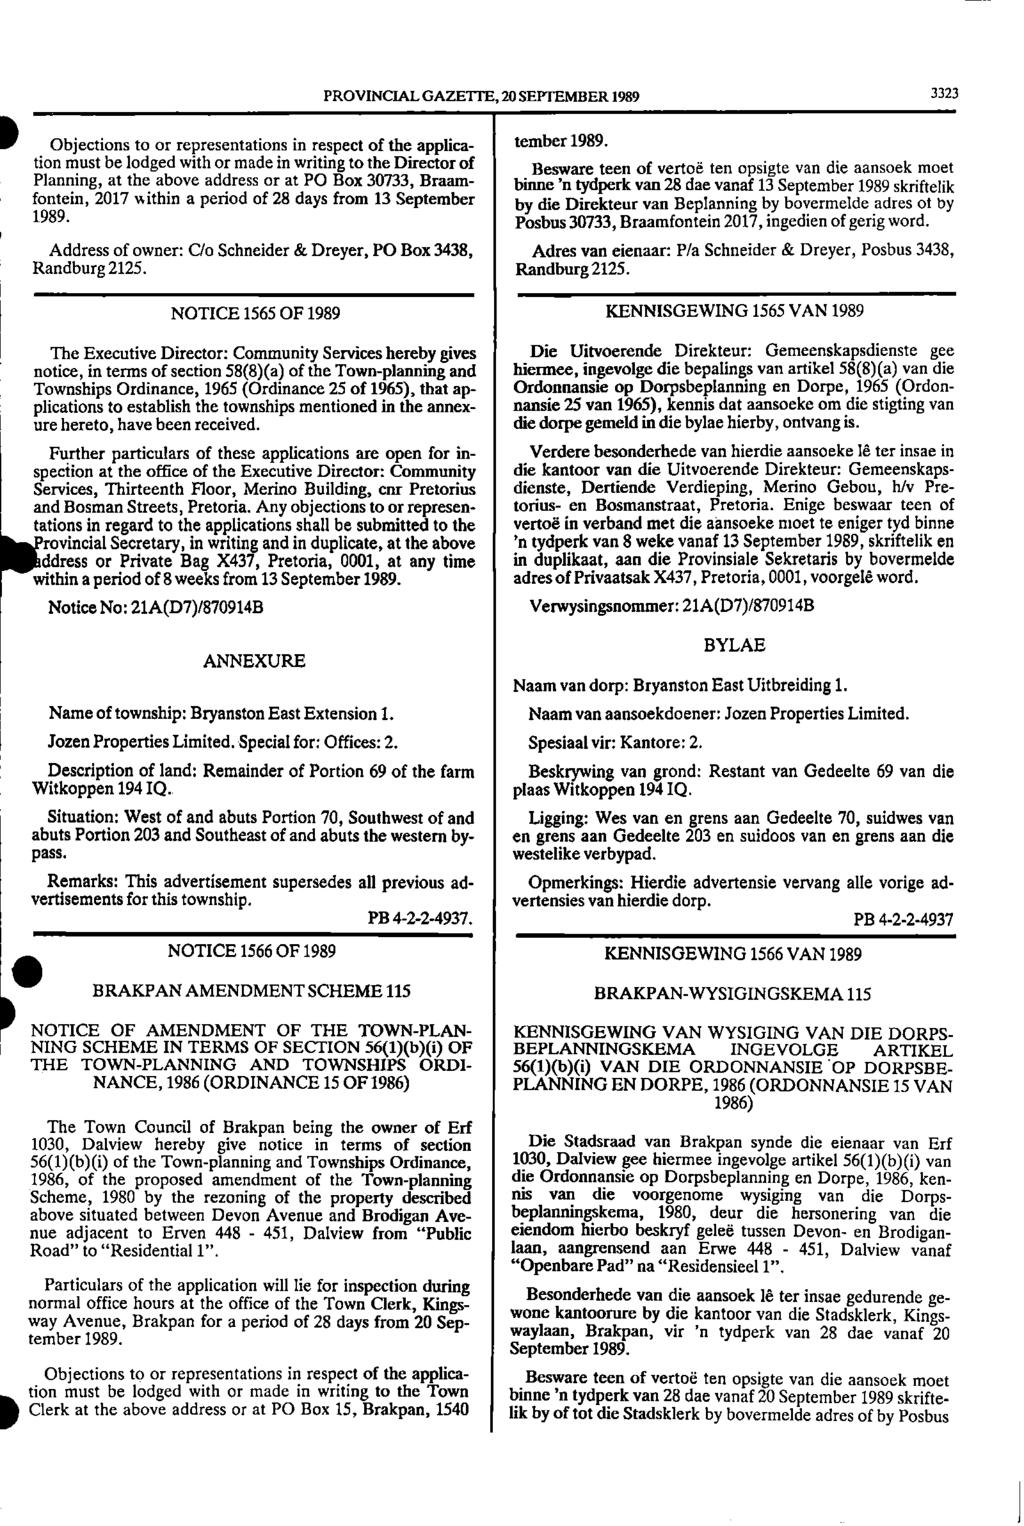 1 Name 1 NING PROVINCIAL GAZETTE, 20 SEPTEMBER 1989 3323 1111 Objections to or representations in respect of the applica tember 1989.